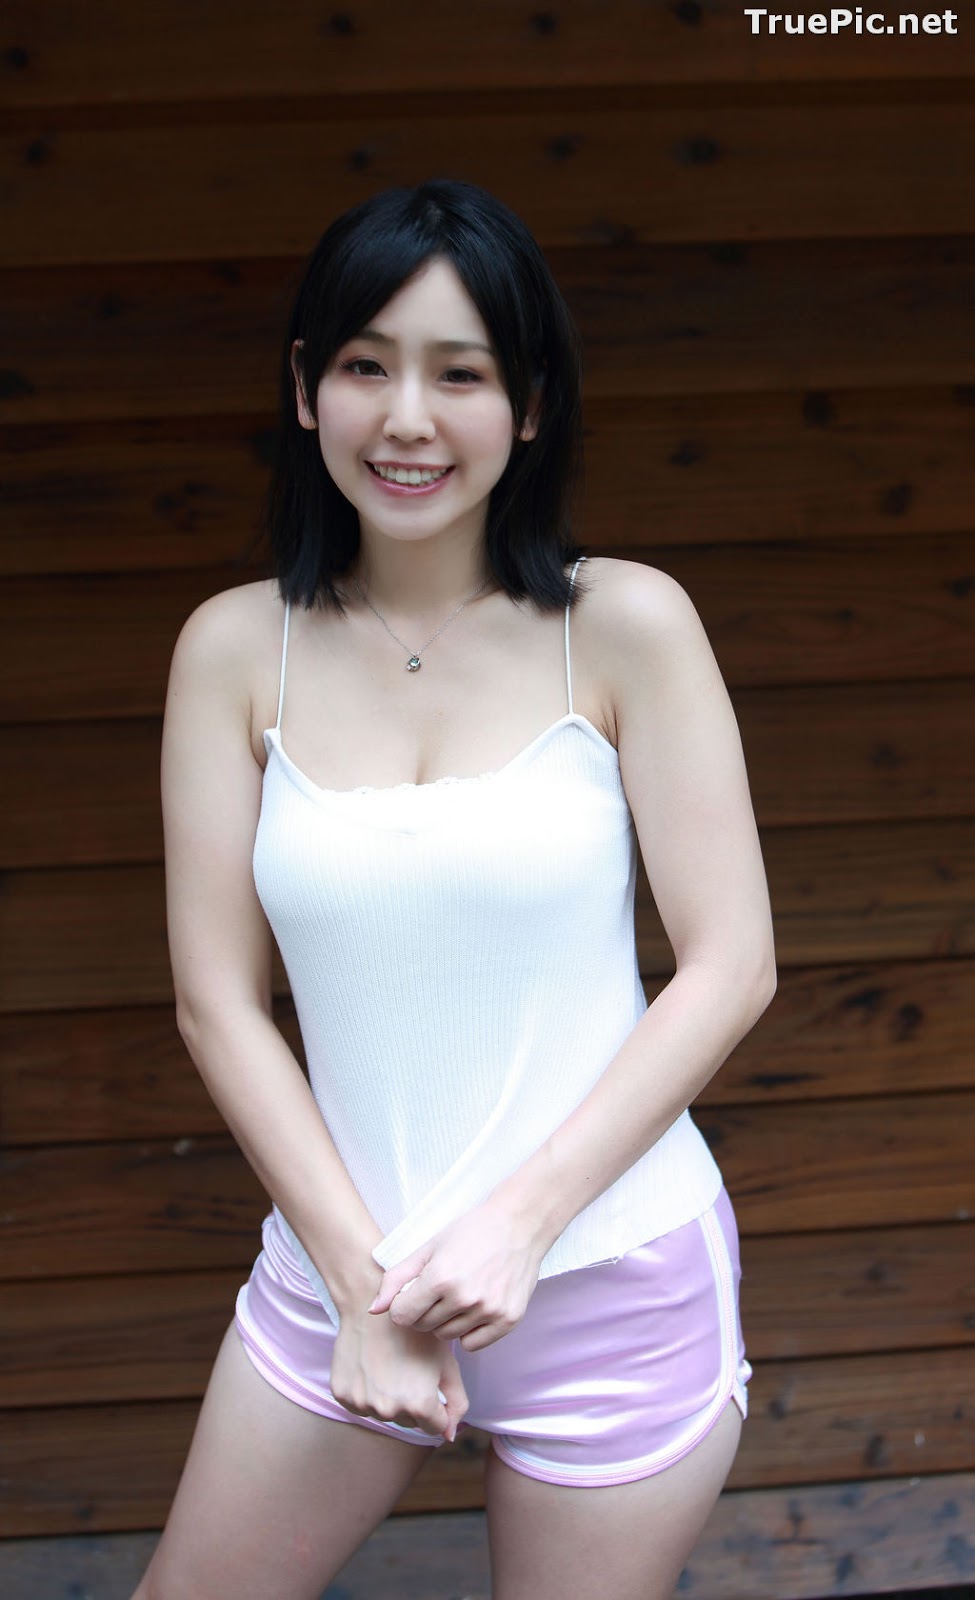 Image Taiwanese Model - 陳希希 - Lovely and Pure Girl - TruePic.net - Picture-2